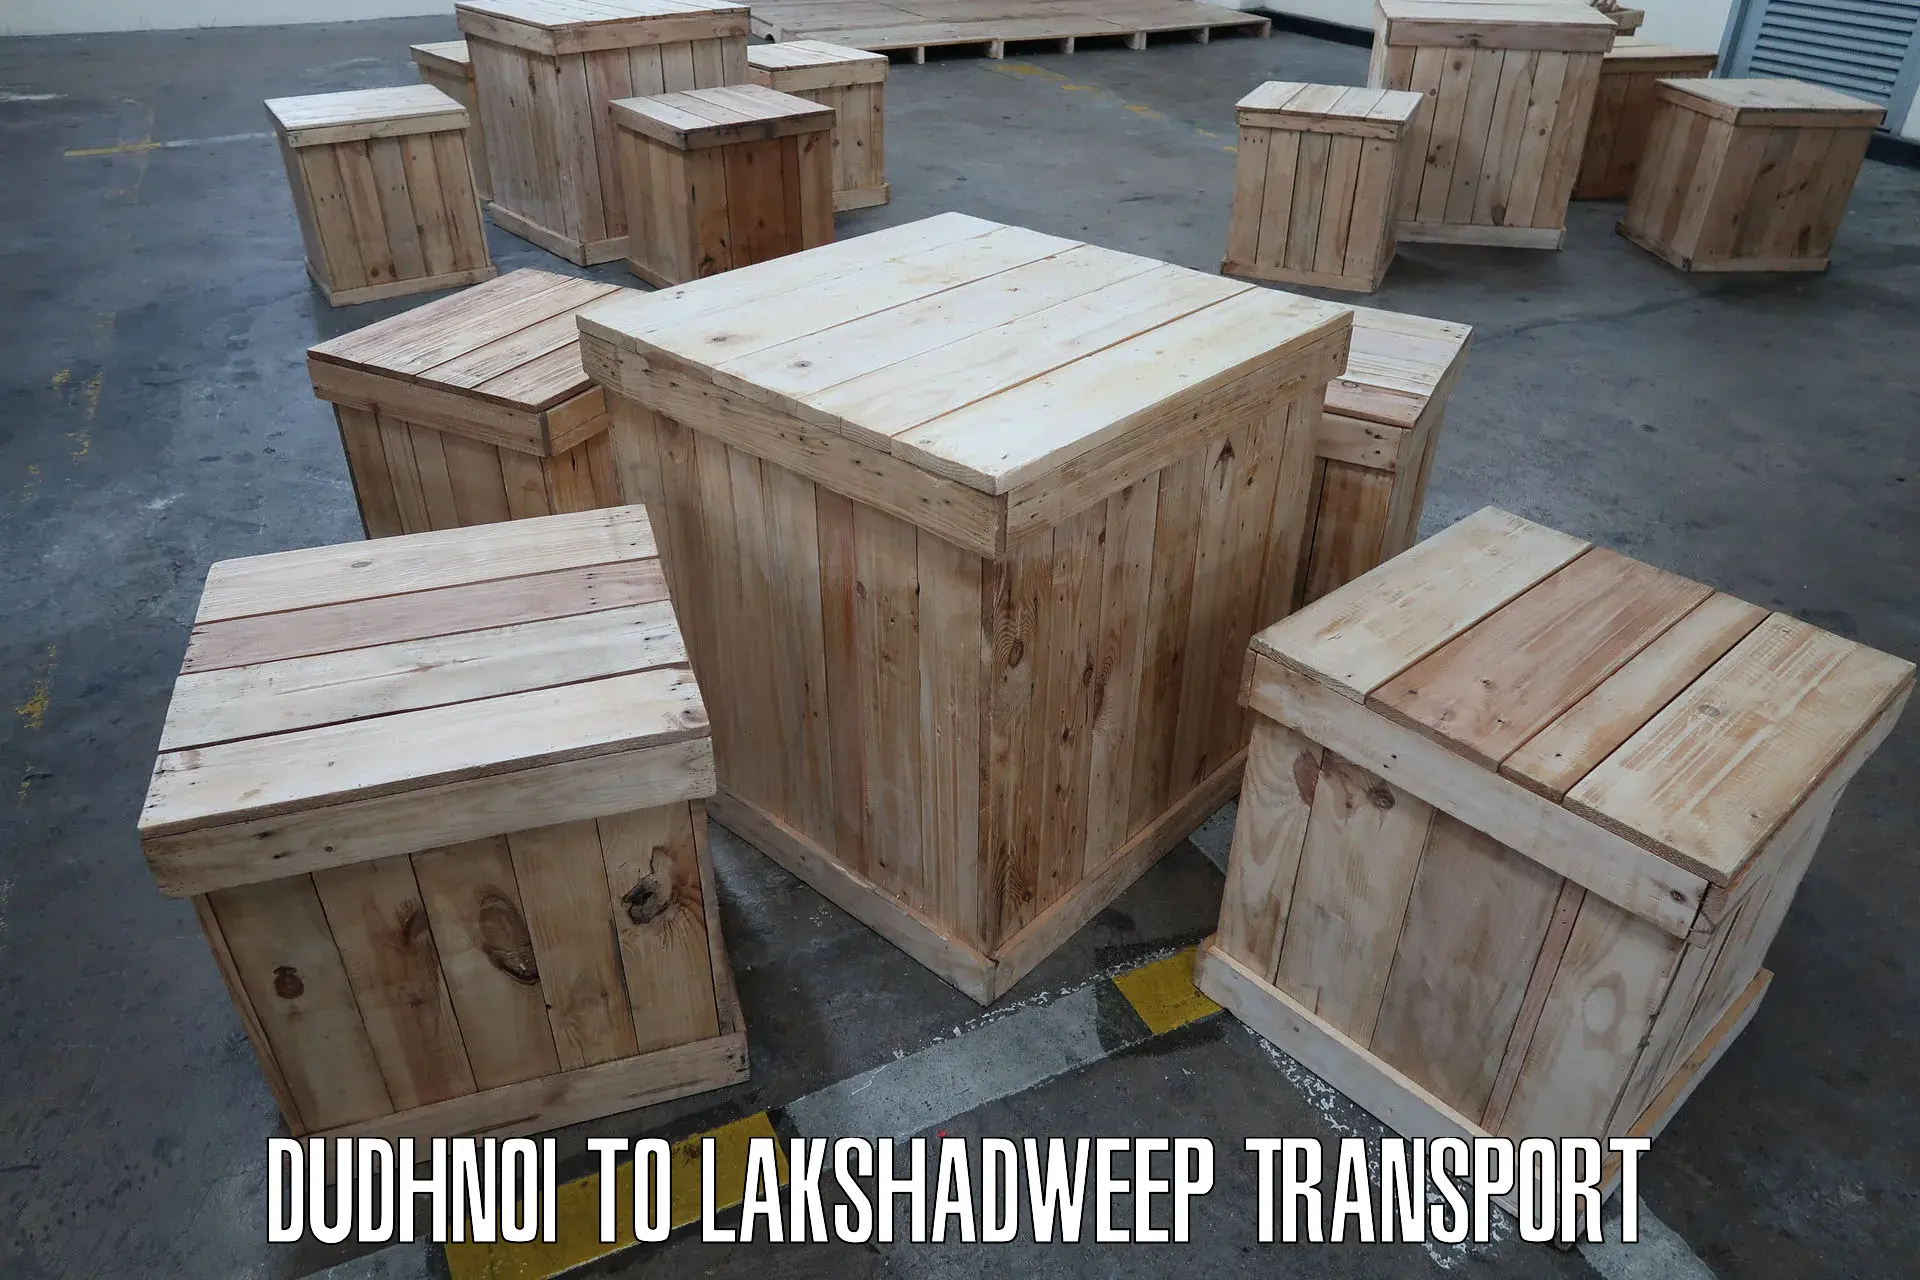 Lorry transport service Dudhnoi to Lakshadweep